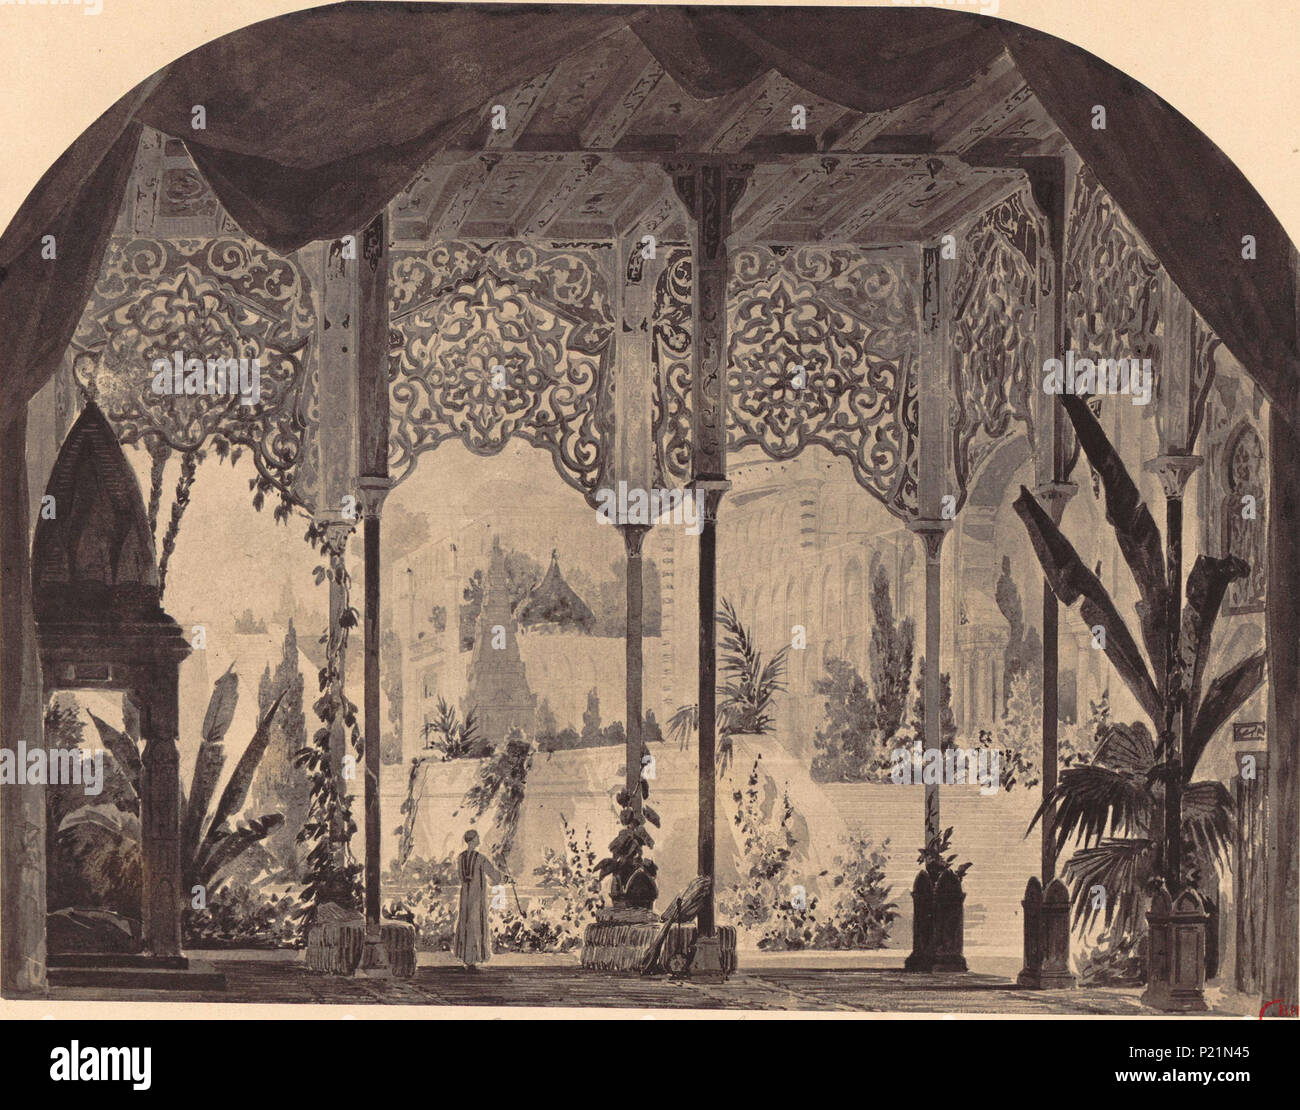 . English: Set design for Act 2 of Lalla Roukh composed by Félicien-César David (premiere production, Opéra-Comique, Paris, May 1862) . 1862. Jean-Pierre Moynet (1819–1876) [signed on the lower left of the original] 171 Lalla Roukh set design Act 2 Stock Photo